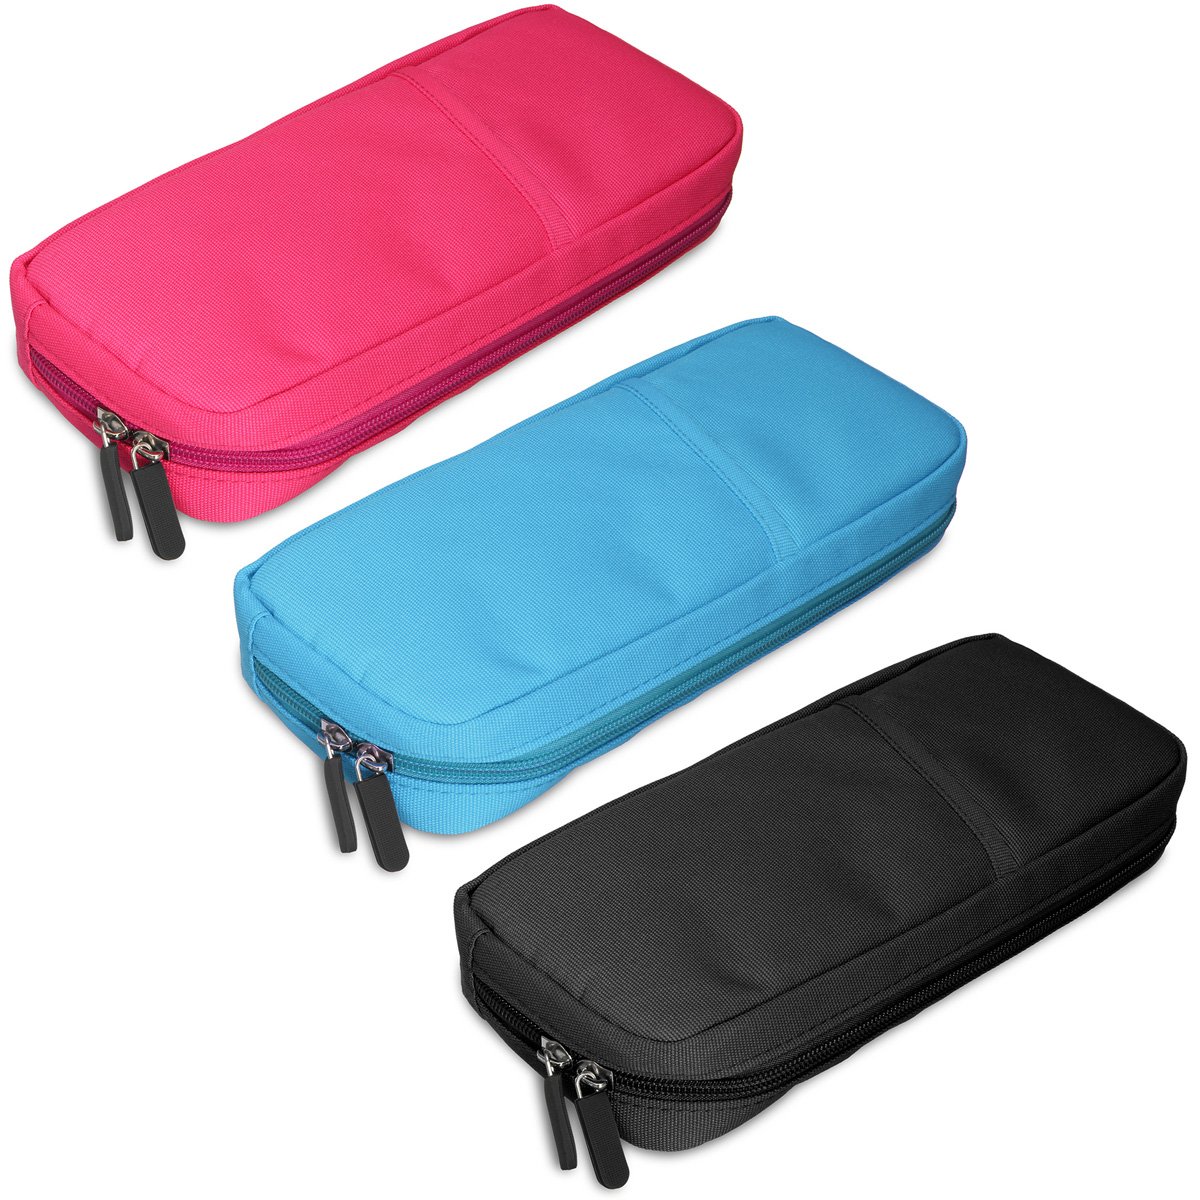 Portable Soft Protective Storage Case Bag For Nintendo Switch Game Console 1